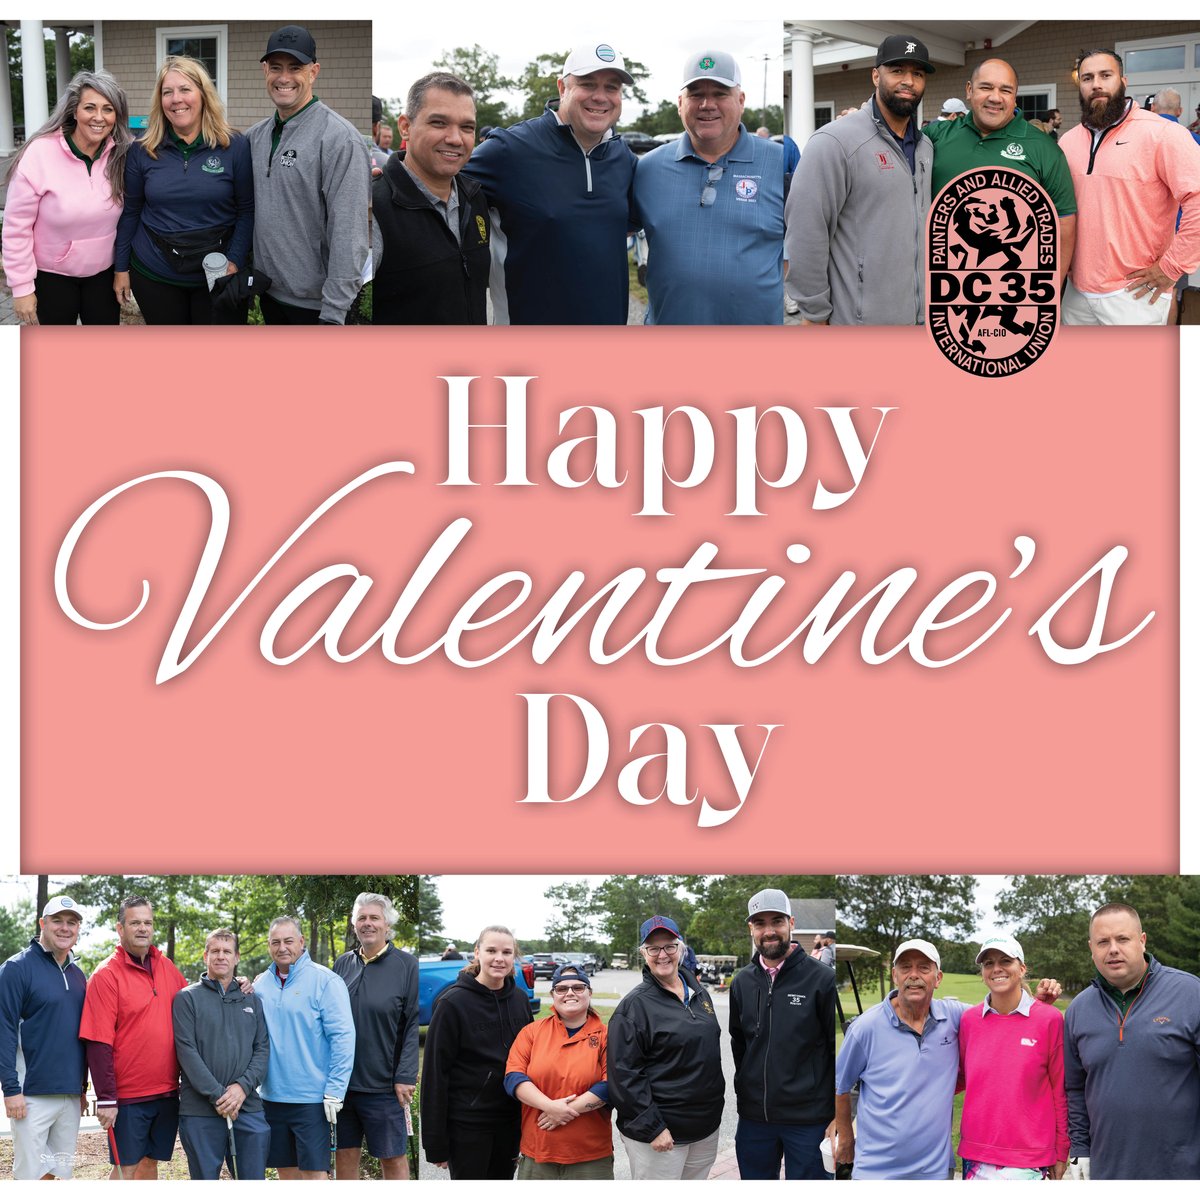 There's nothing like the relationships you make in your union. Happy Valentine's Day from DC 35!